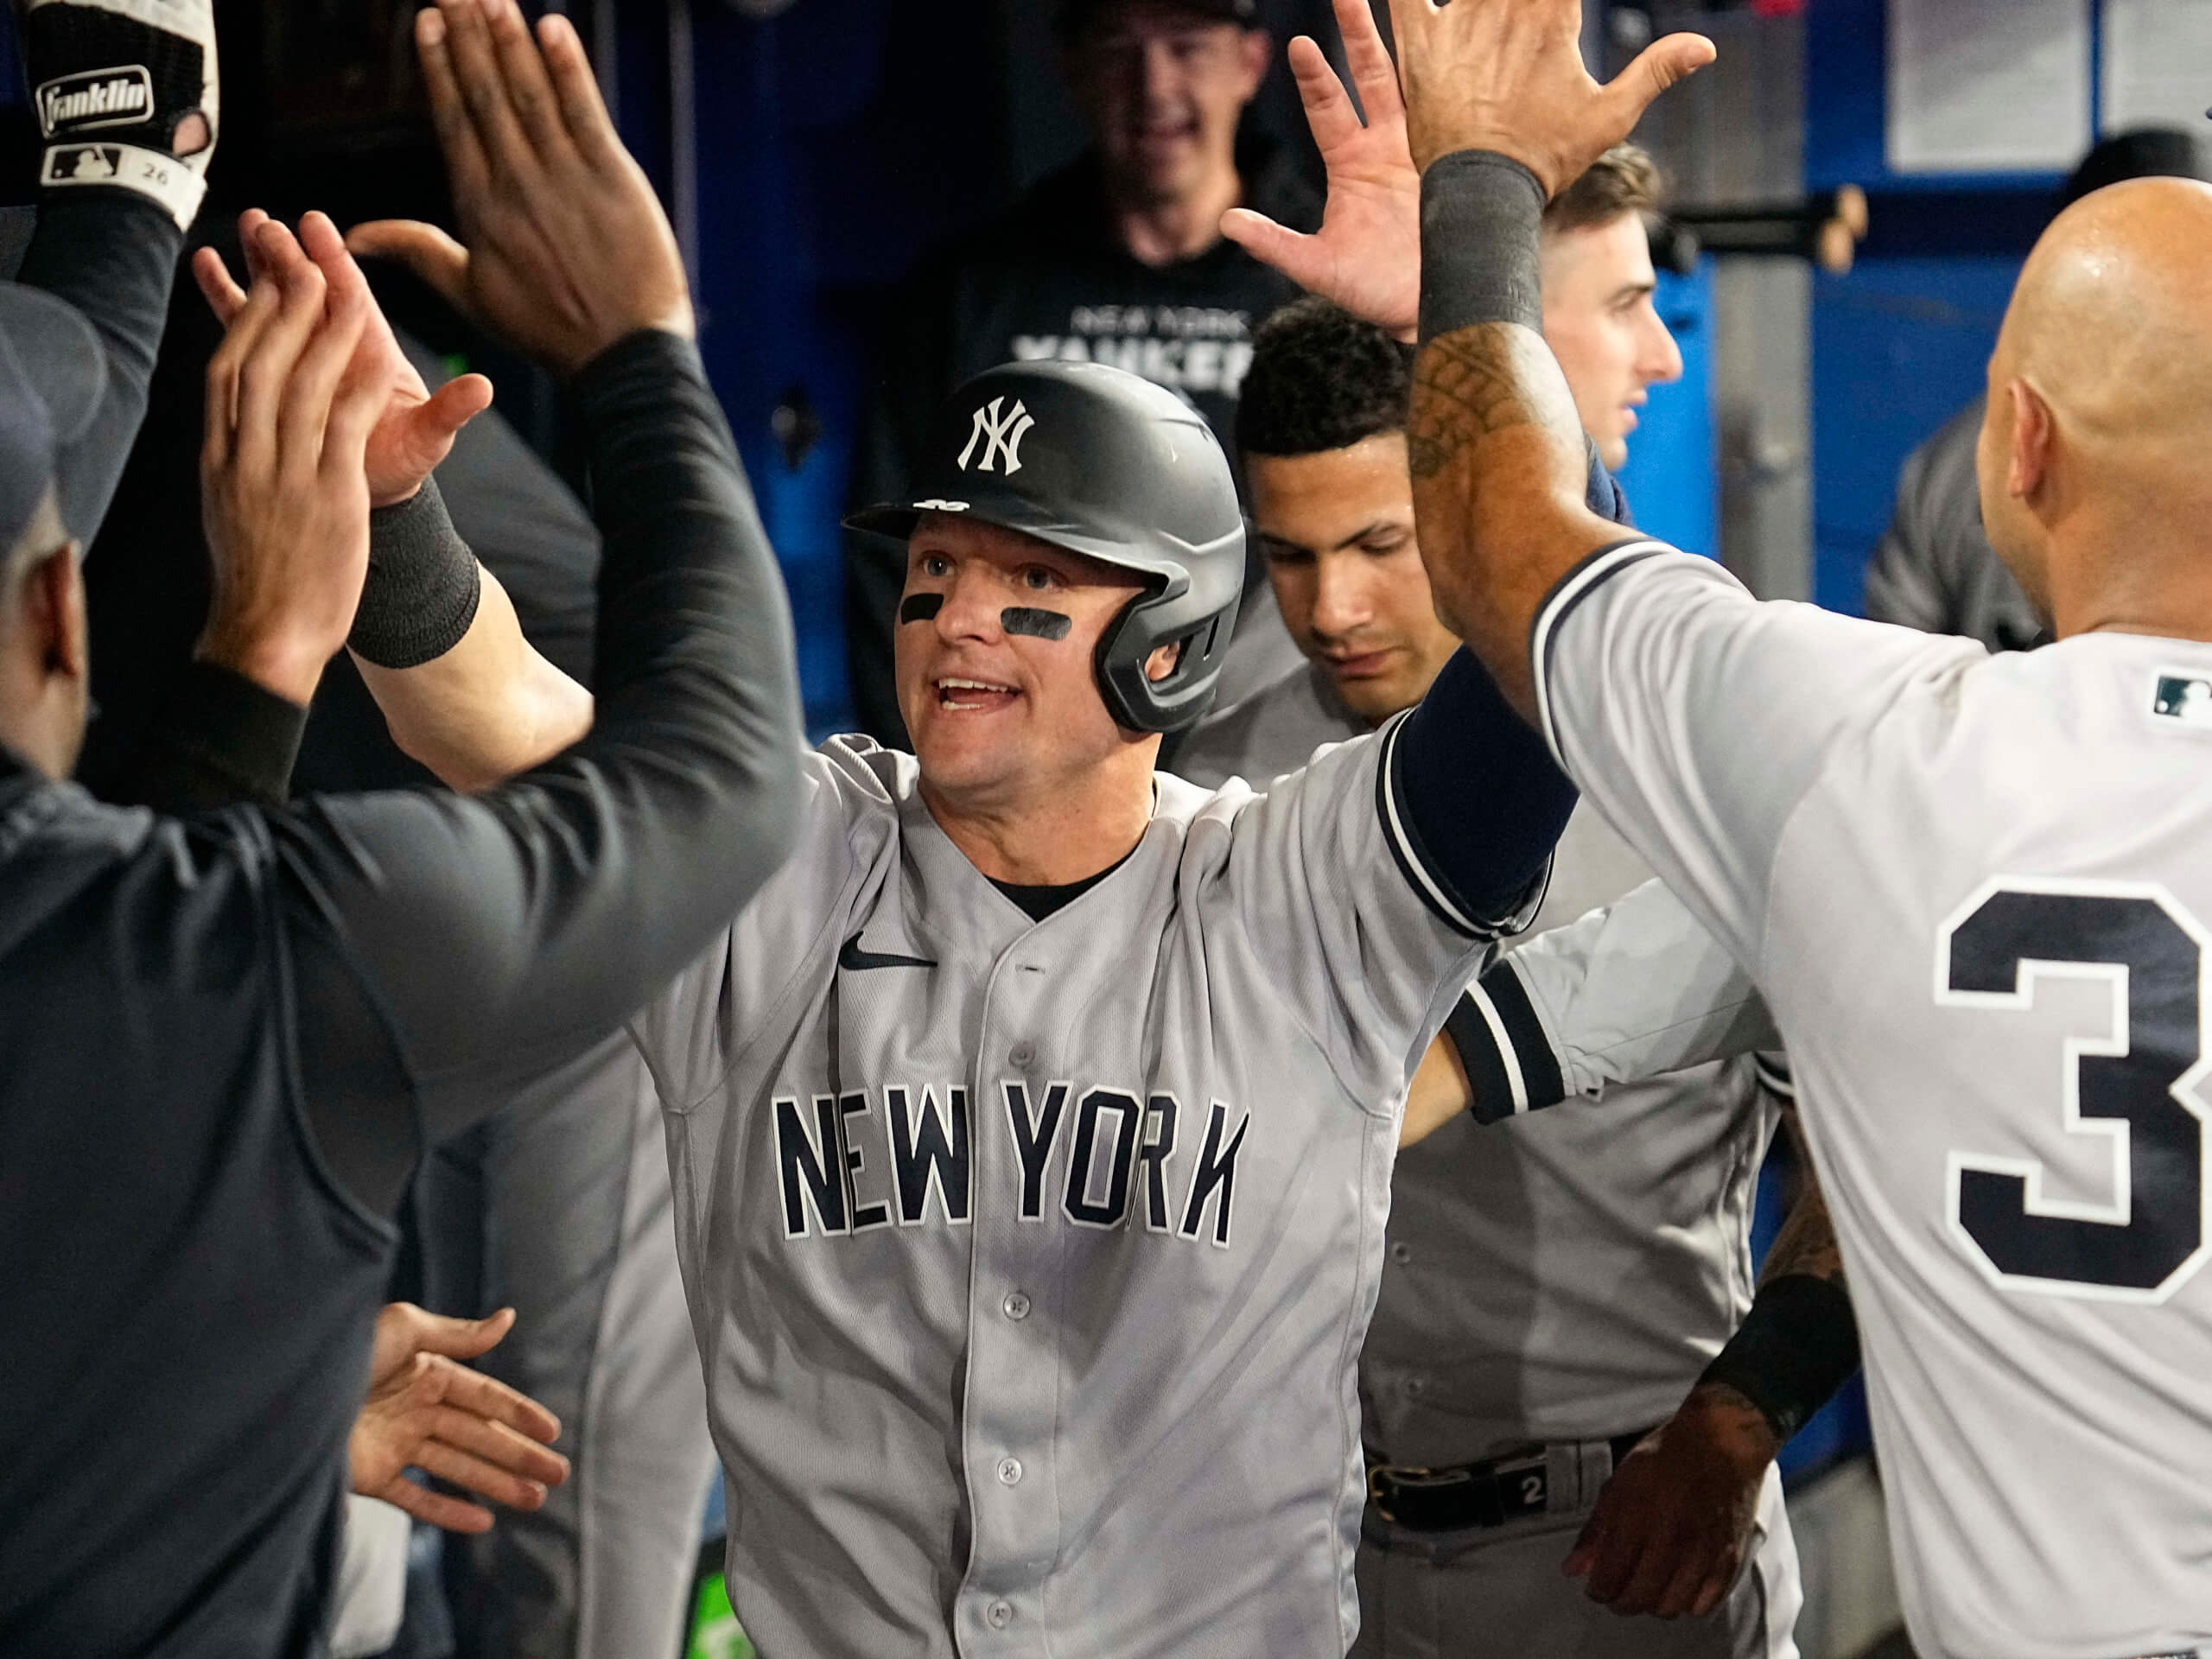 Yankees extend win streak to 11 after beating Blue Jays